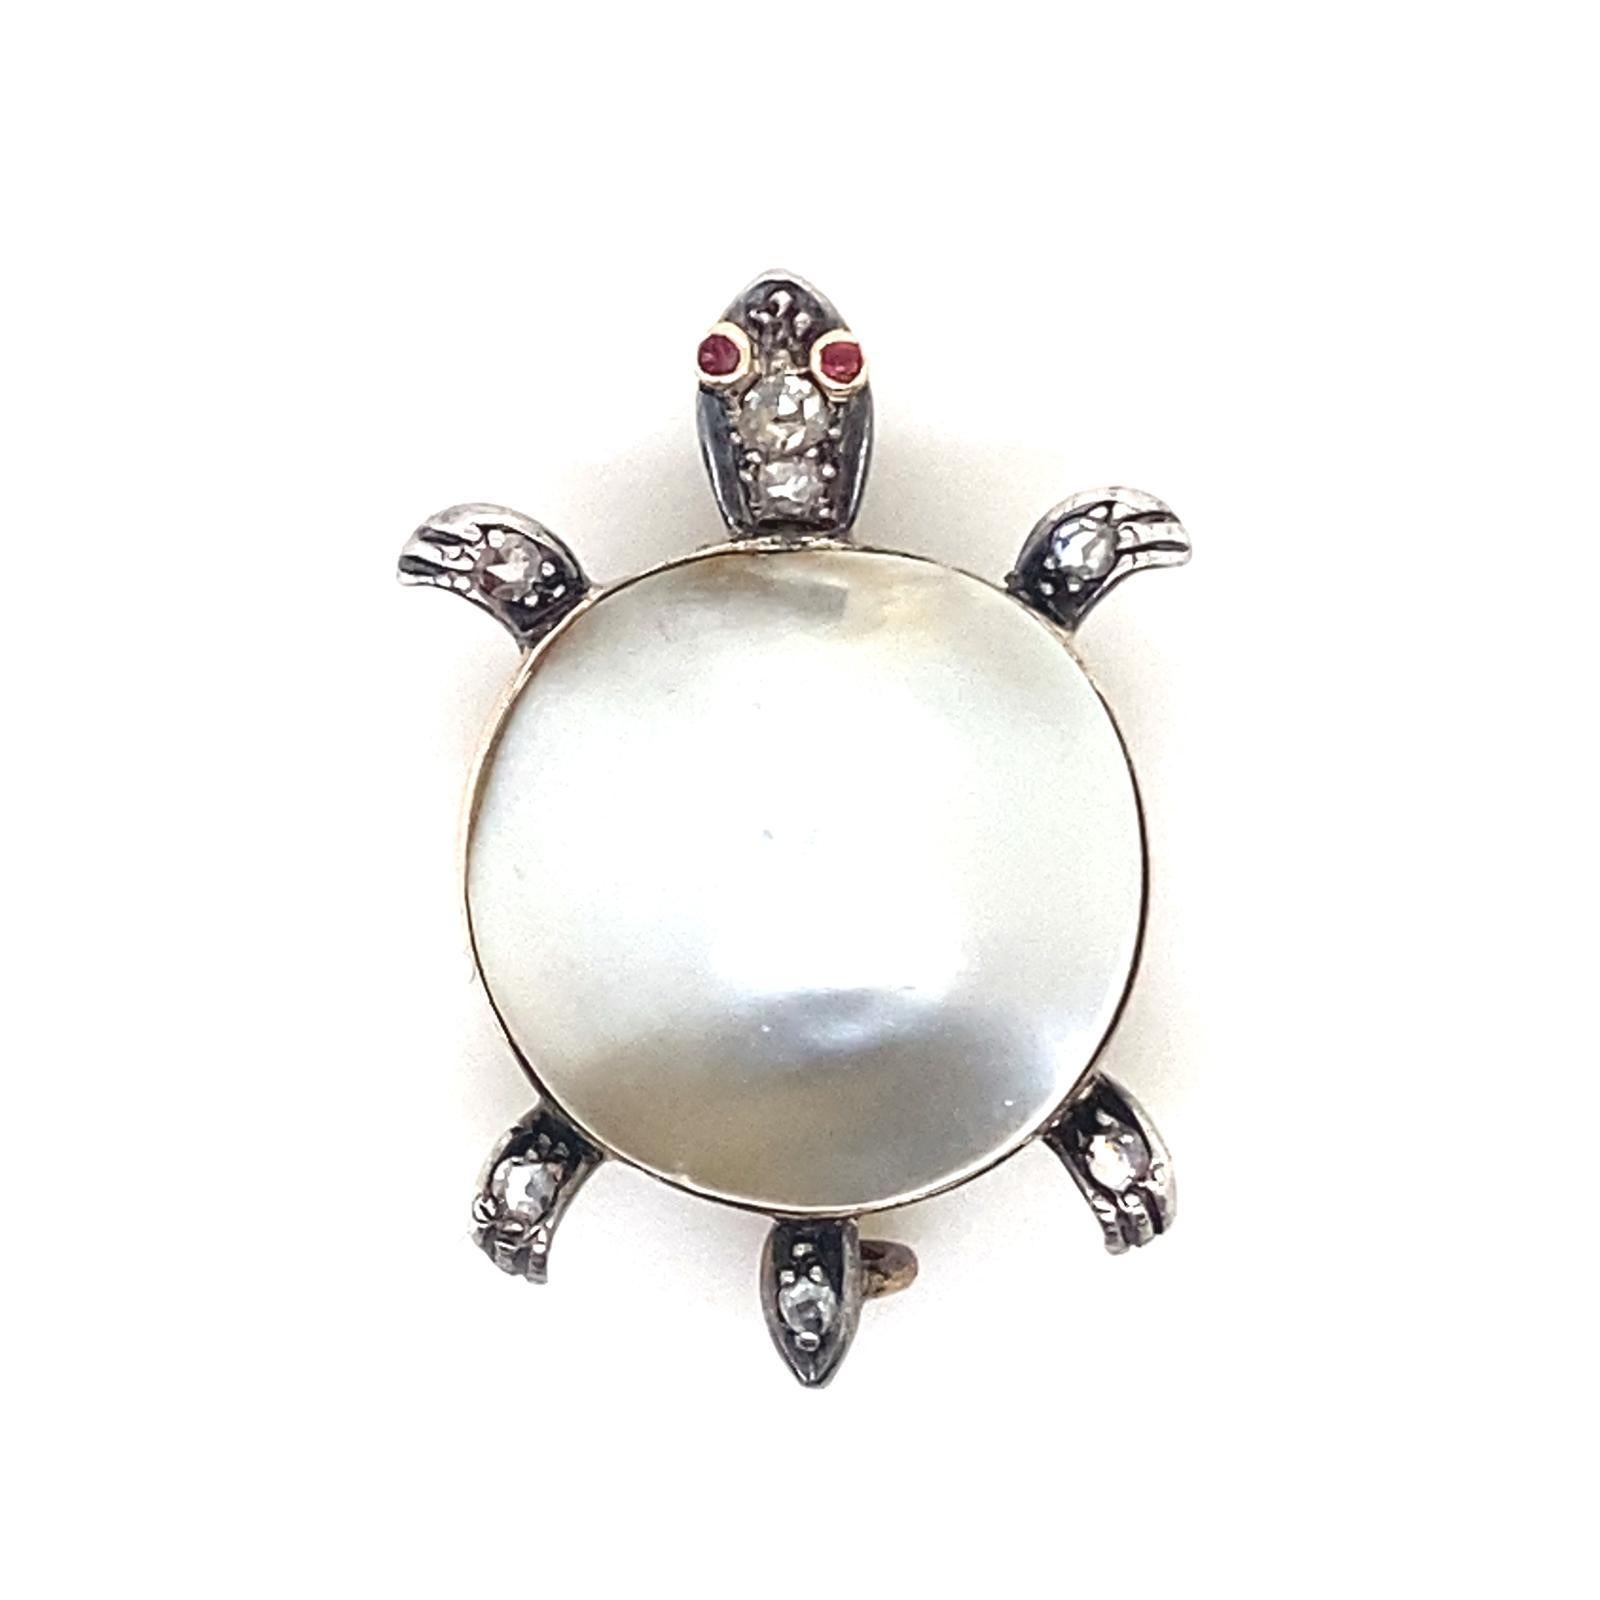 A Victorian Turtle Brooch in Yellow Gold and Silver set with Diamond and Ruby

This antique turtle pin brooch is highly collectible. Its shell comprises of a a mabe pearl set into yellow gold. His legs, tail and head are grain set in silver with old